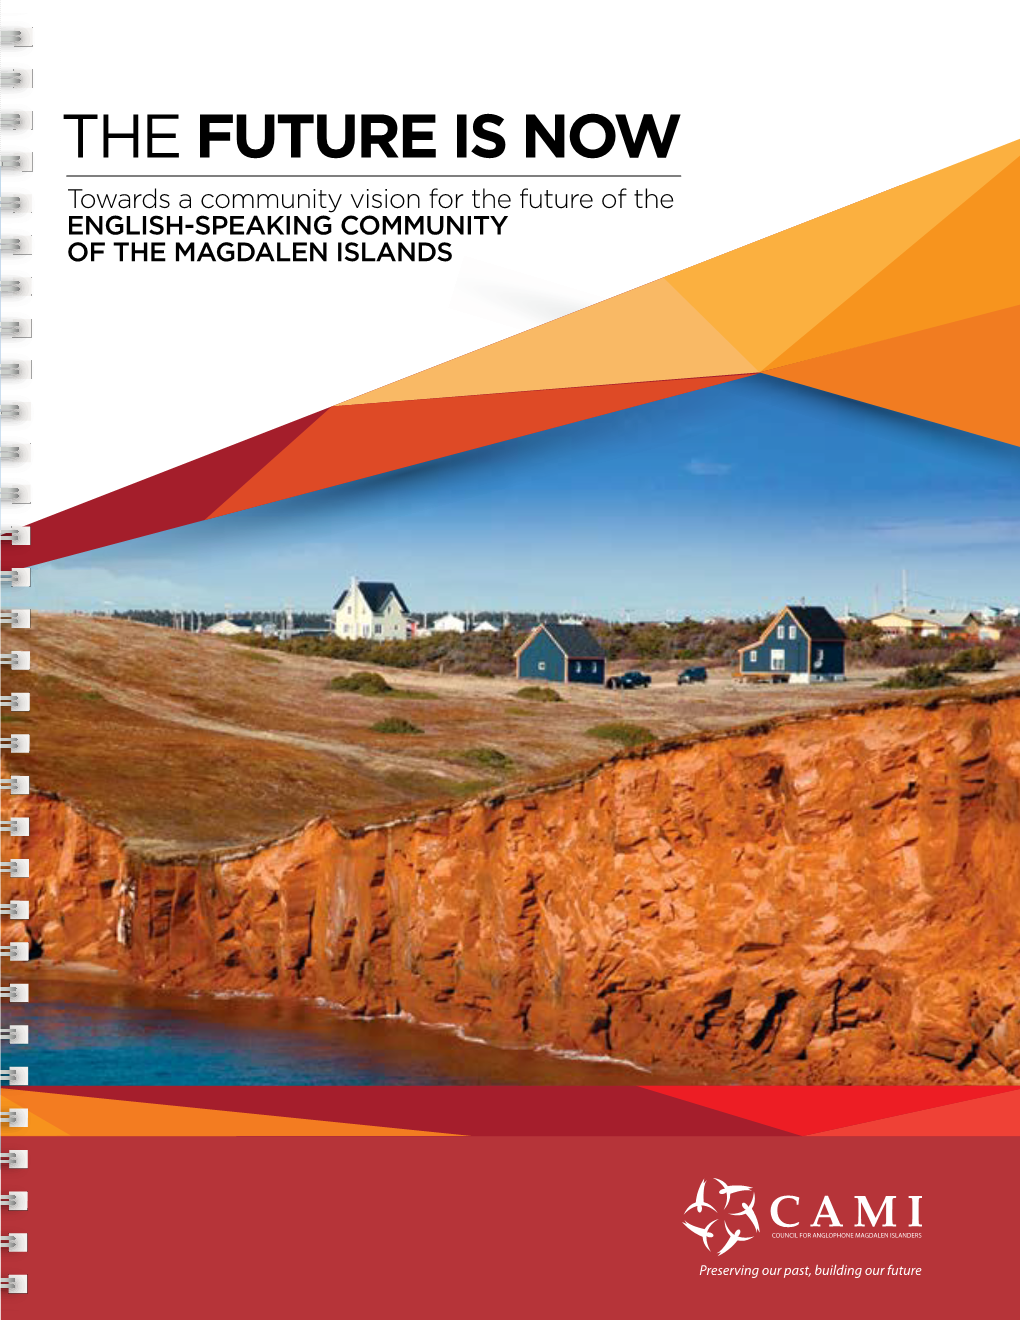 THE FUTURE IS NOW Towards a Community Vision for the Future of the ENGLISH-SPEAKING COMMUNITY of the MAGDALEN ISLANDS TABLE of CONTENTS